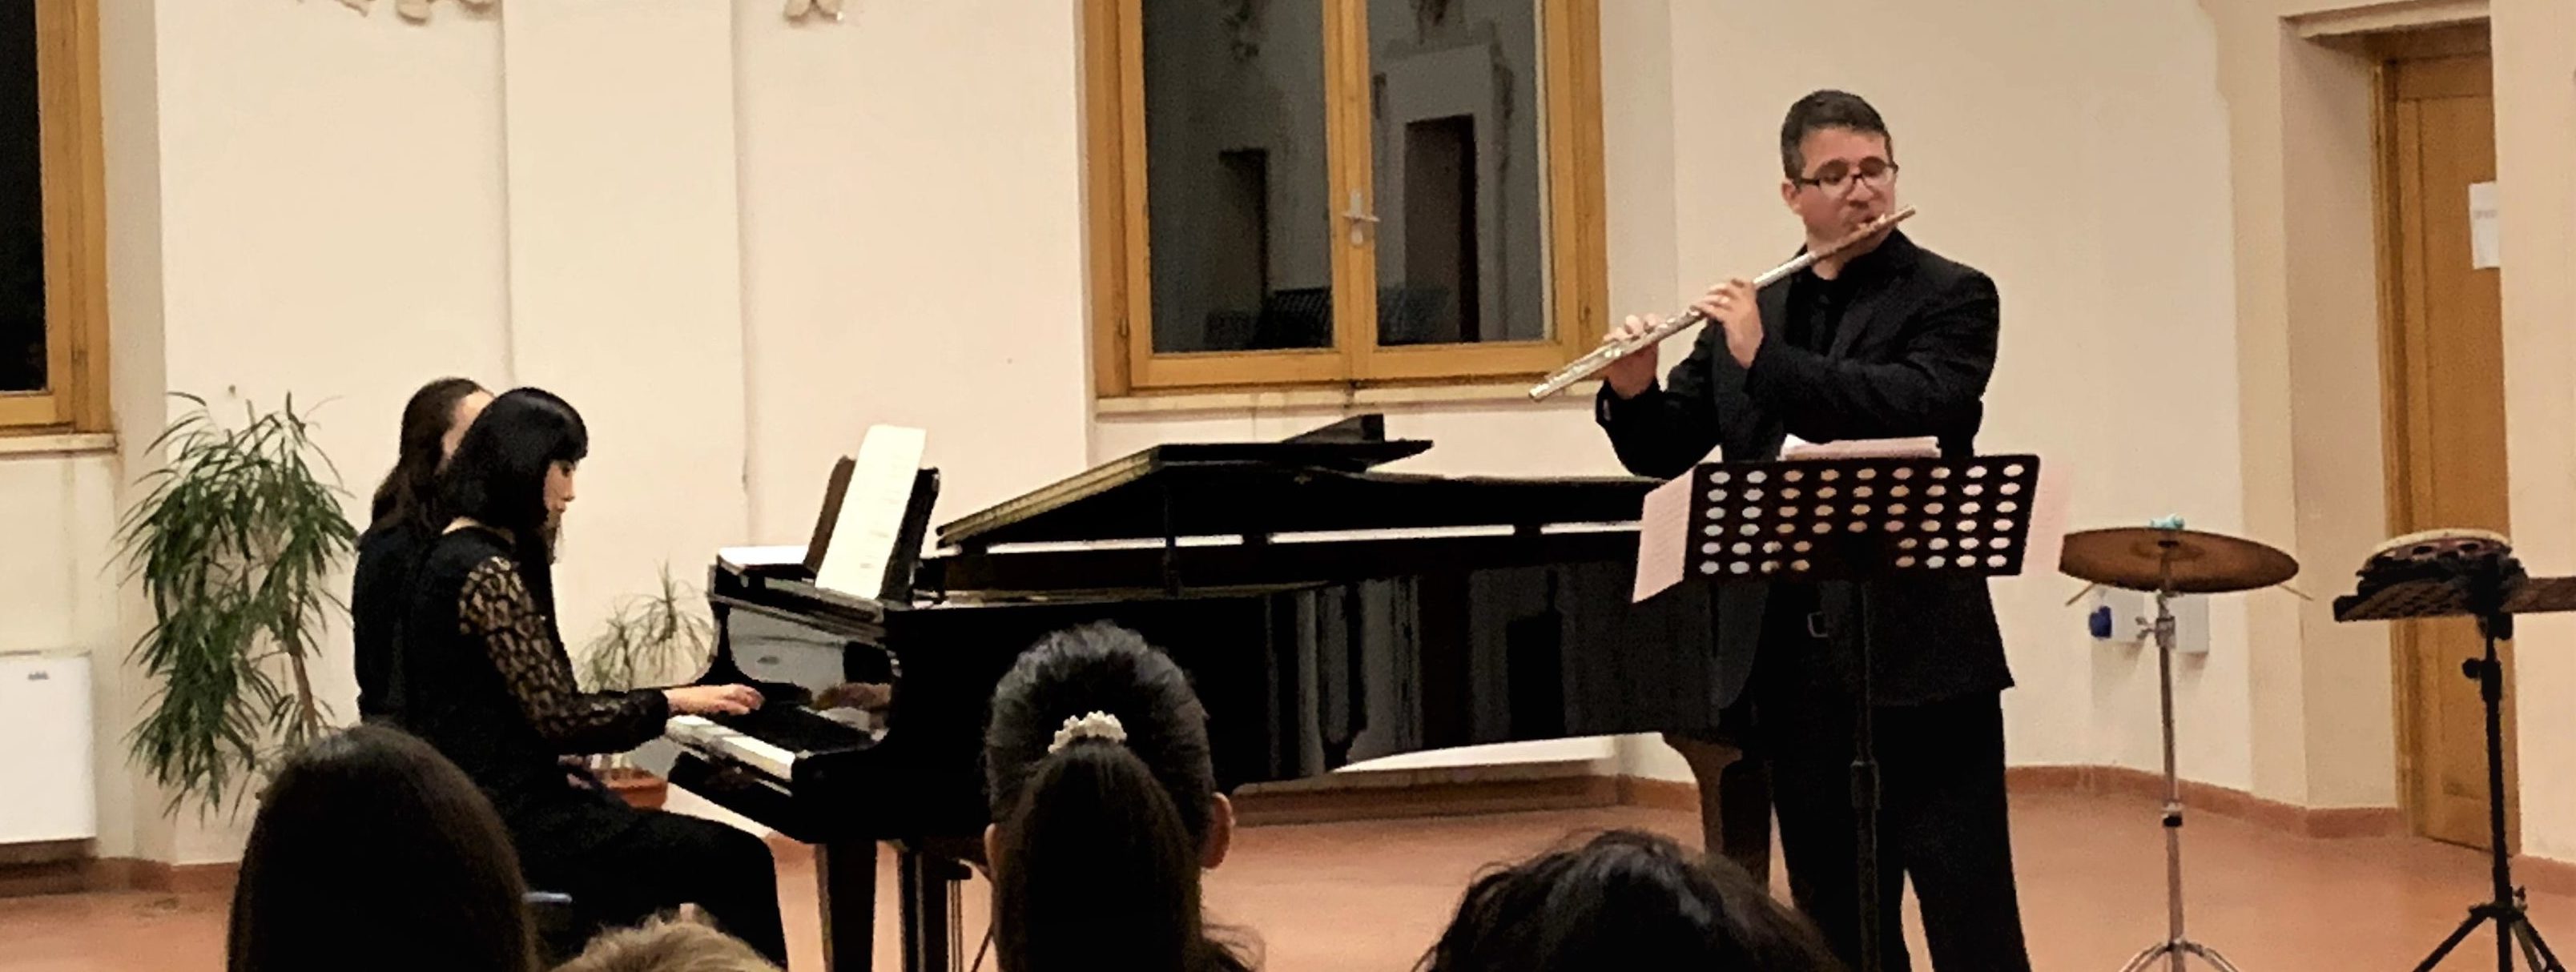 Ouachita professors Dr. Mary Chung (on piano) and Dr. Carlos Feller (on flute) perform at the International Flute Workshop’s opening recital in Ferentino, Italy. Chung and Feller also taught private lessons, workshops and coached rehearsals for the festival, held May 15-21 in Roccasecca.